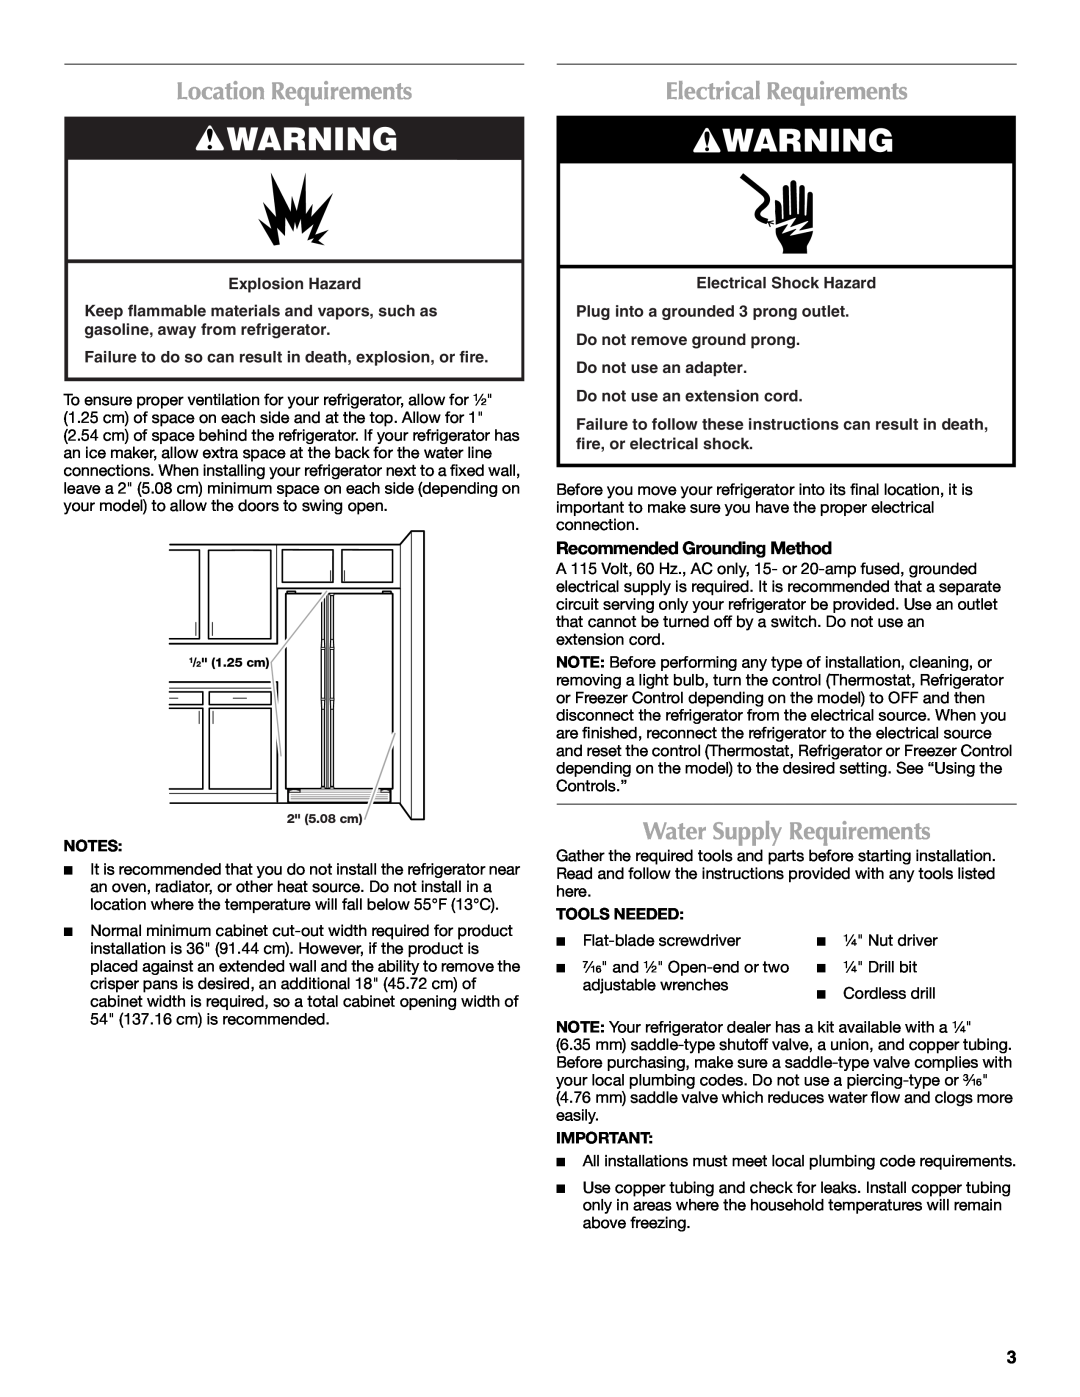 Maytag W10321481A Location Requirements, Electrical Requirements, Water Supply Requirements, Recommended Grounding Method 